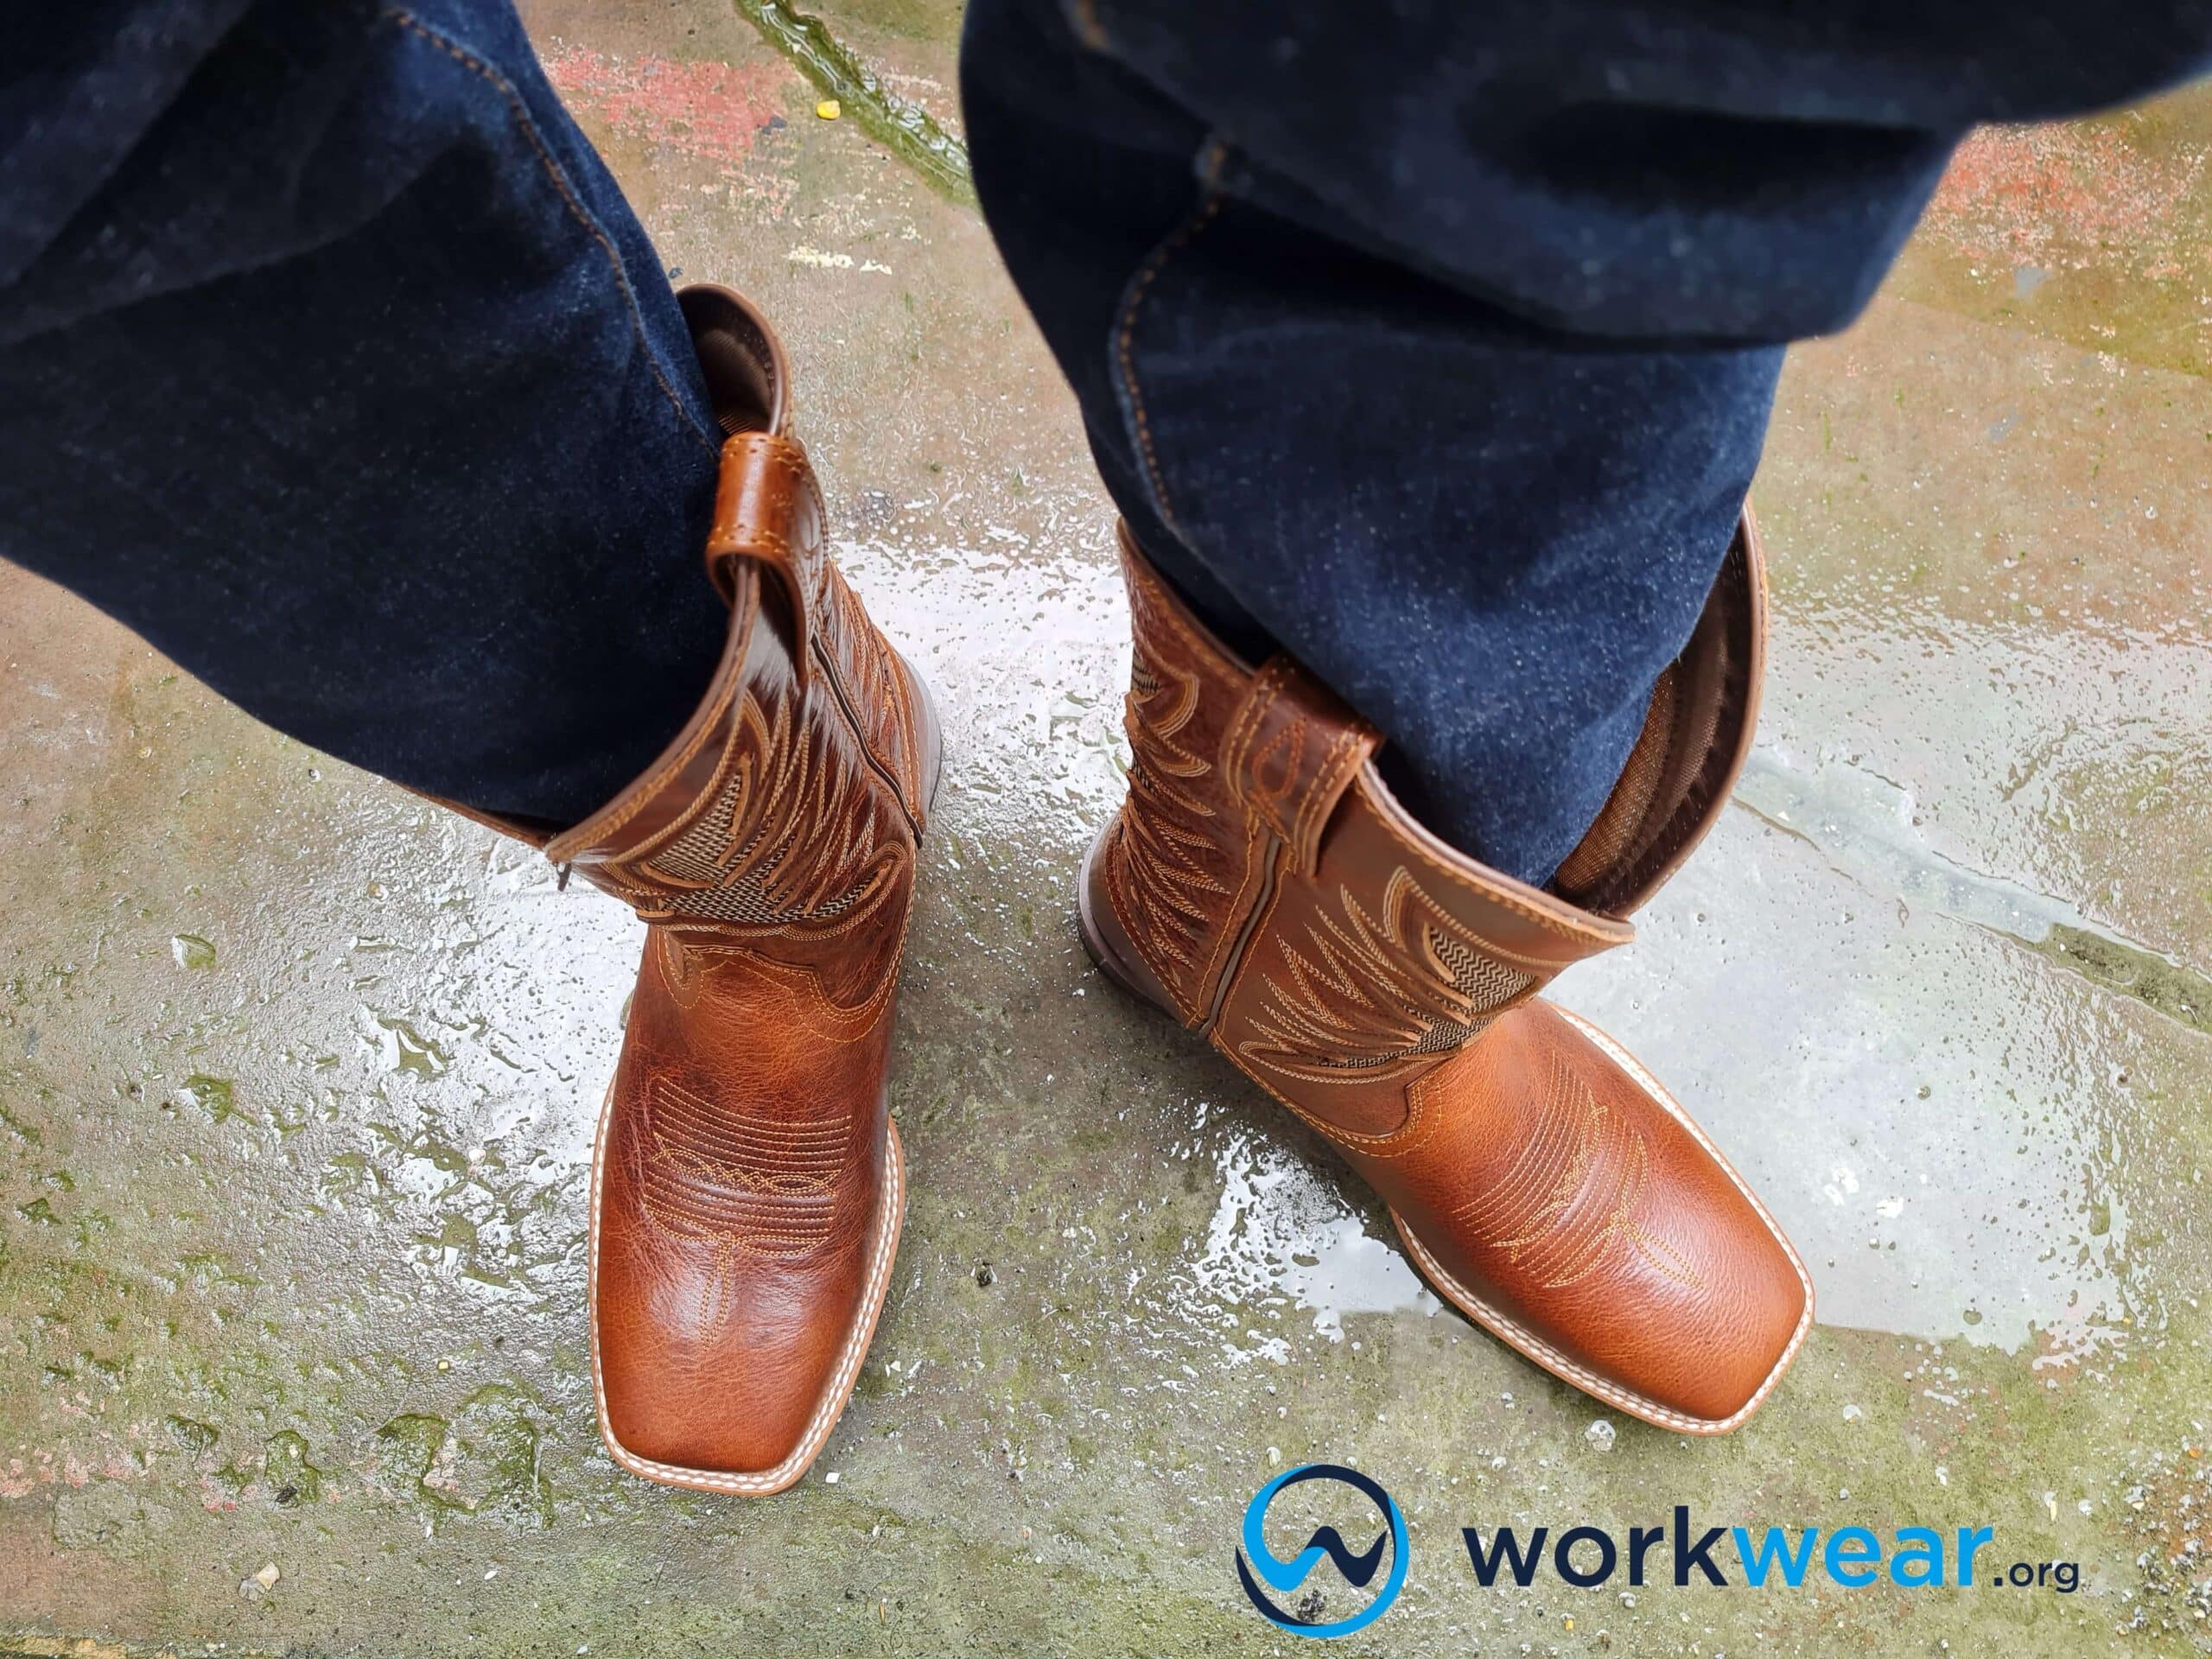 Ariat Vs Justin Boots - Who Wins the Duel? | WorkWear.org